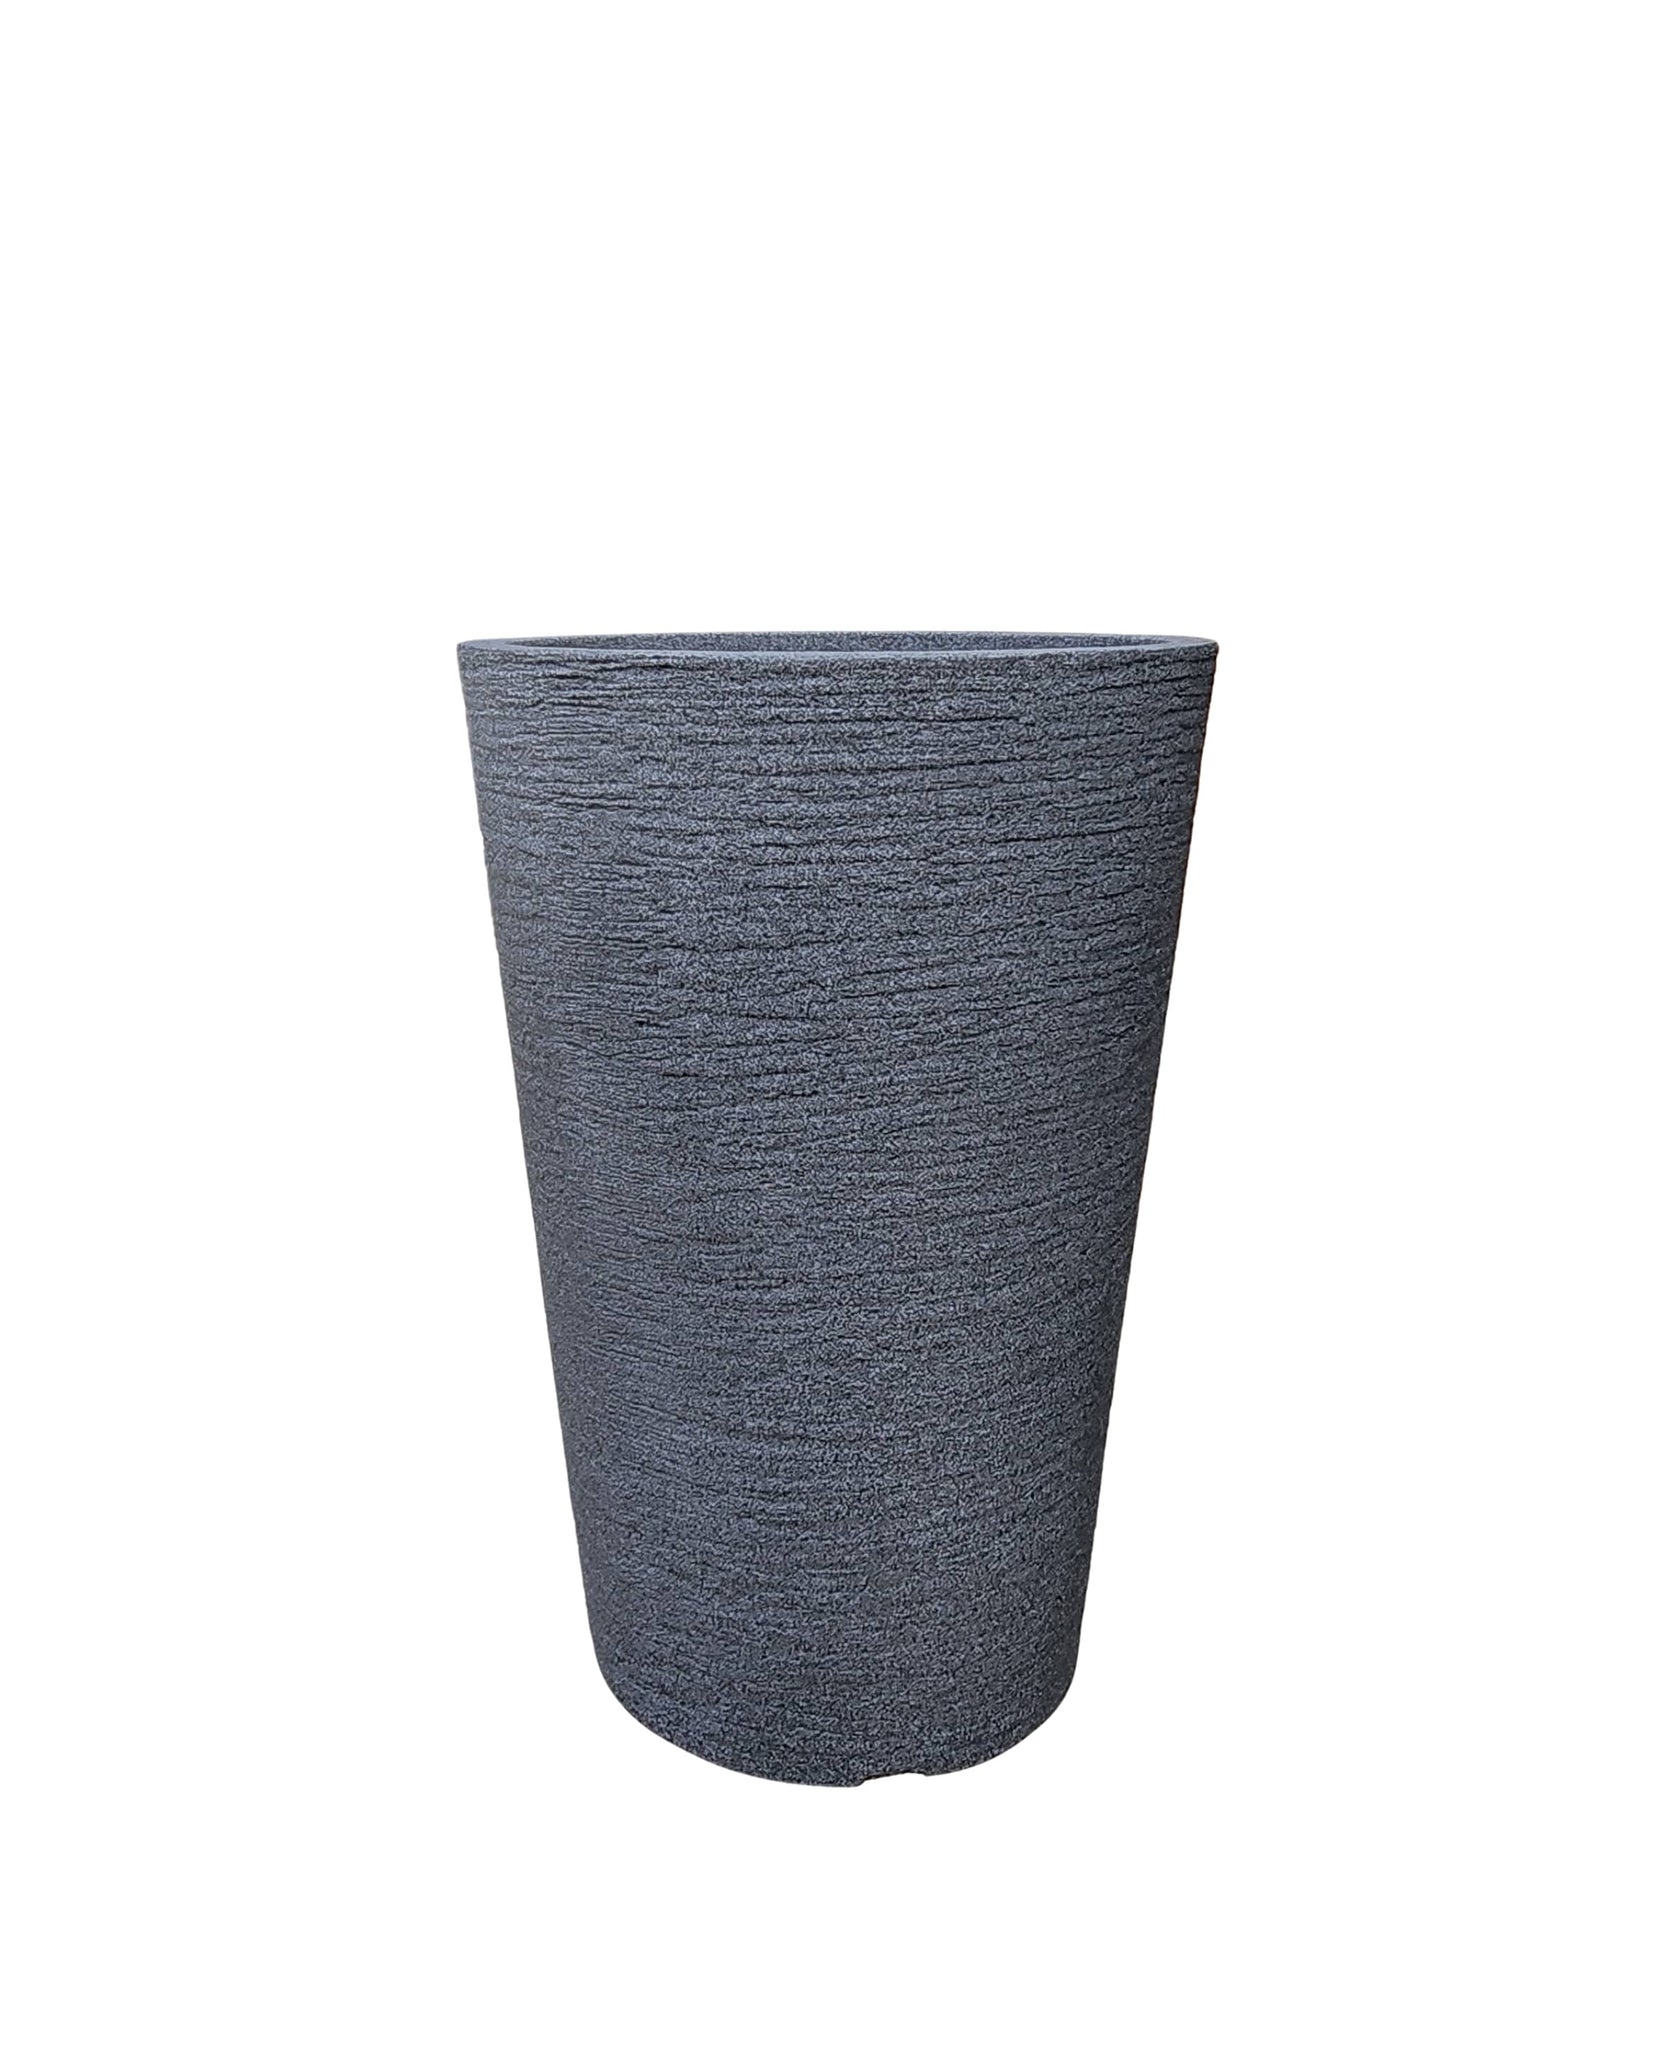 Small upright European conic Japi planter in the colour Charcoal. Textured finish. Modern planter suitable for any style of decor. 